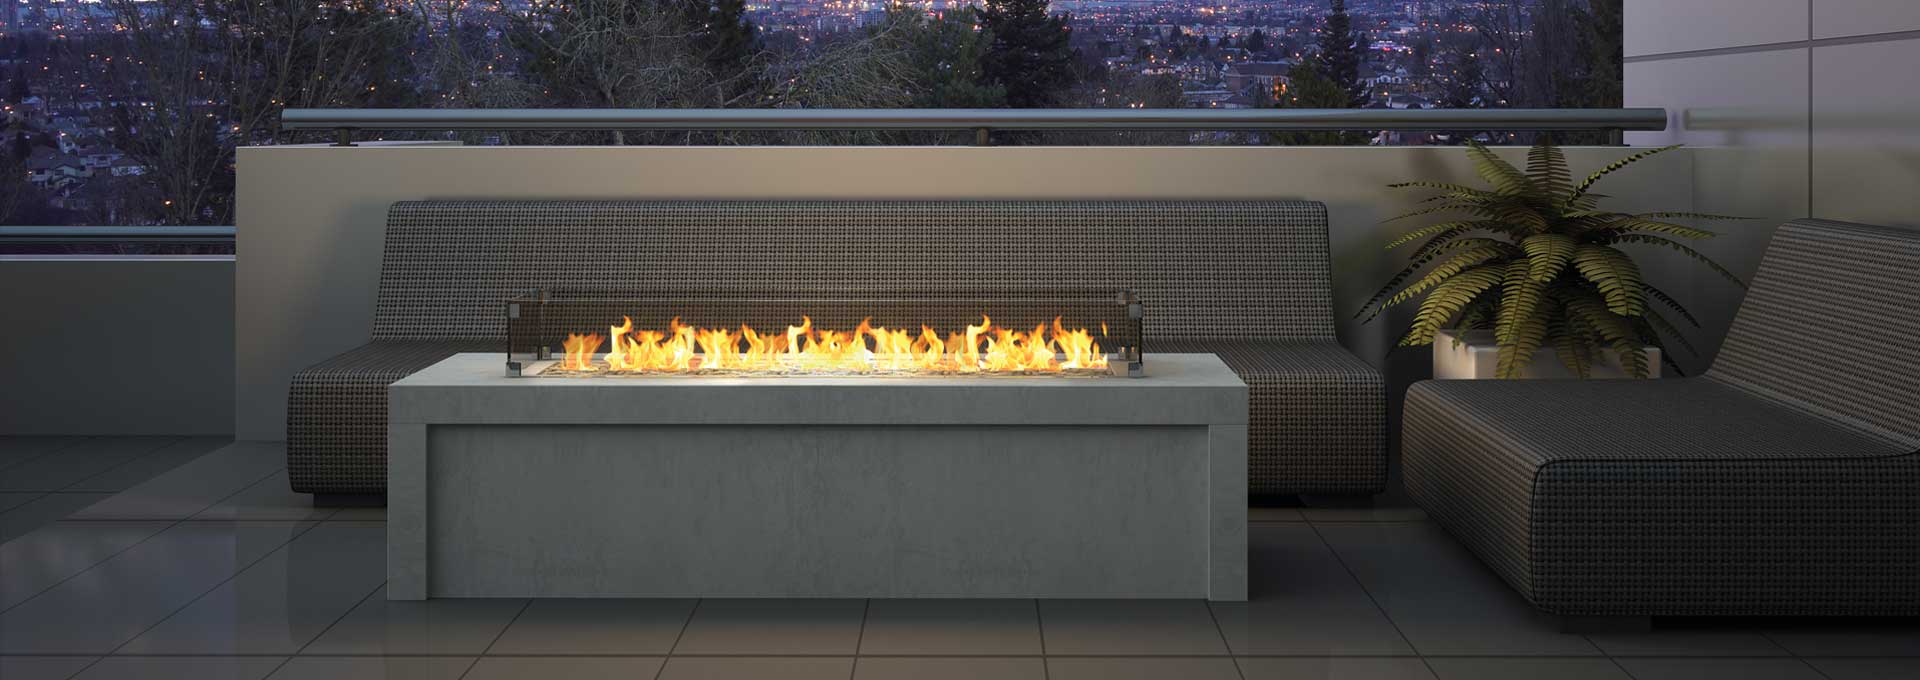 Acucraft Fireplace Luxury Outdoor Linear Fireplace Charming Fireplace